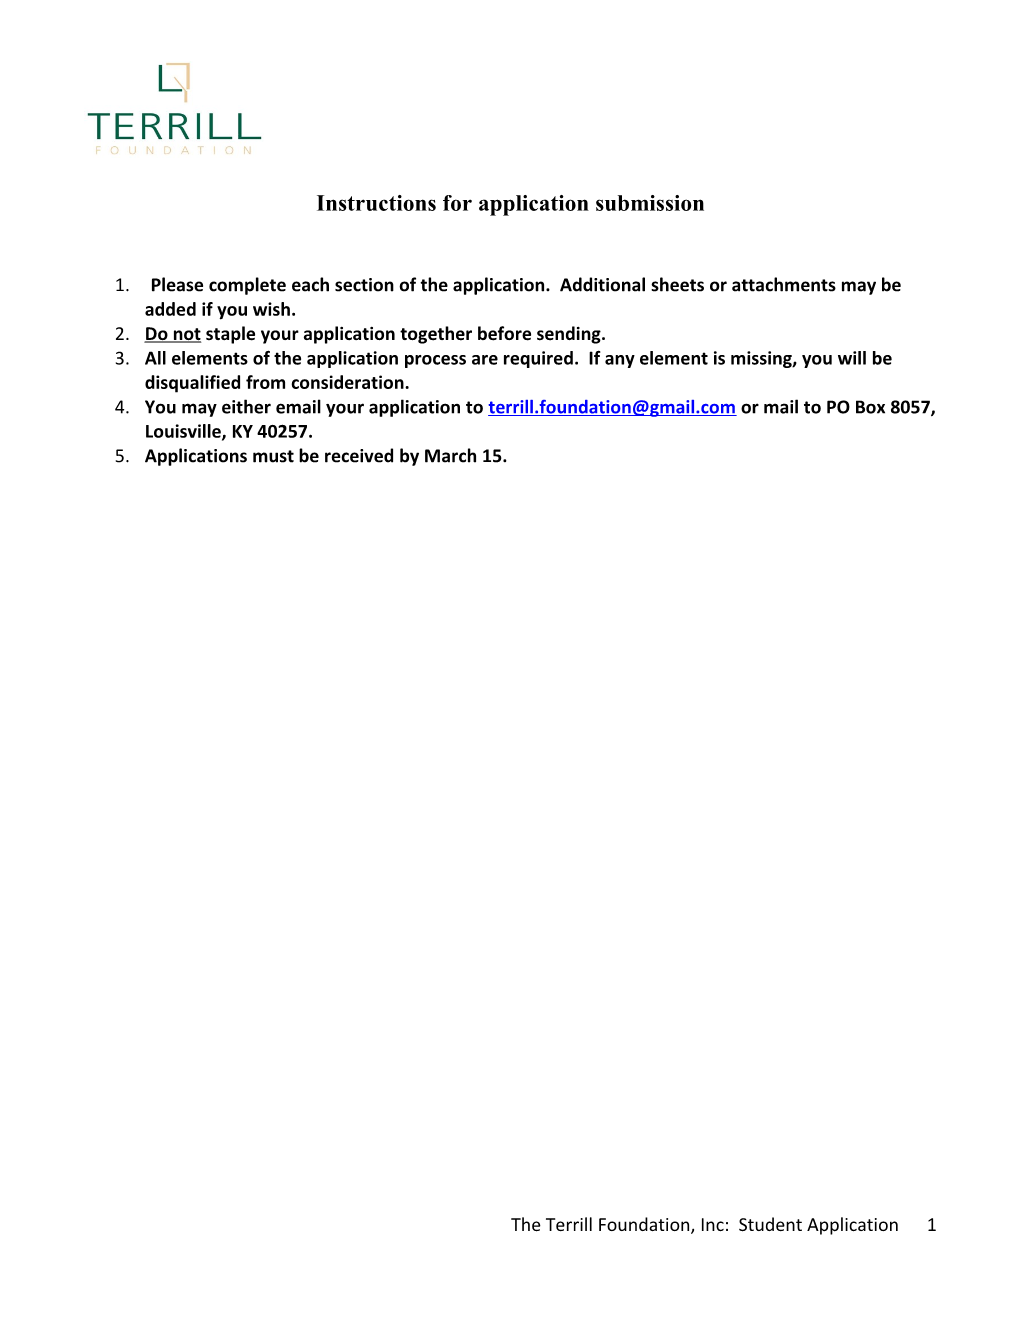 Instructions for Application Submission